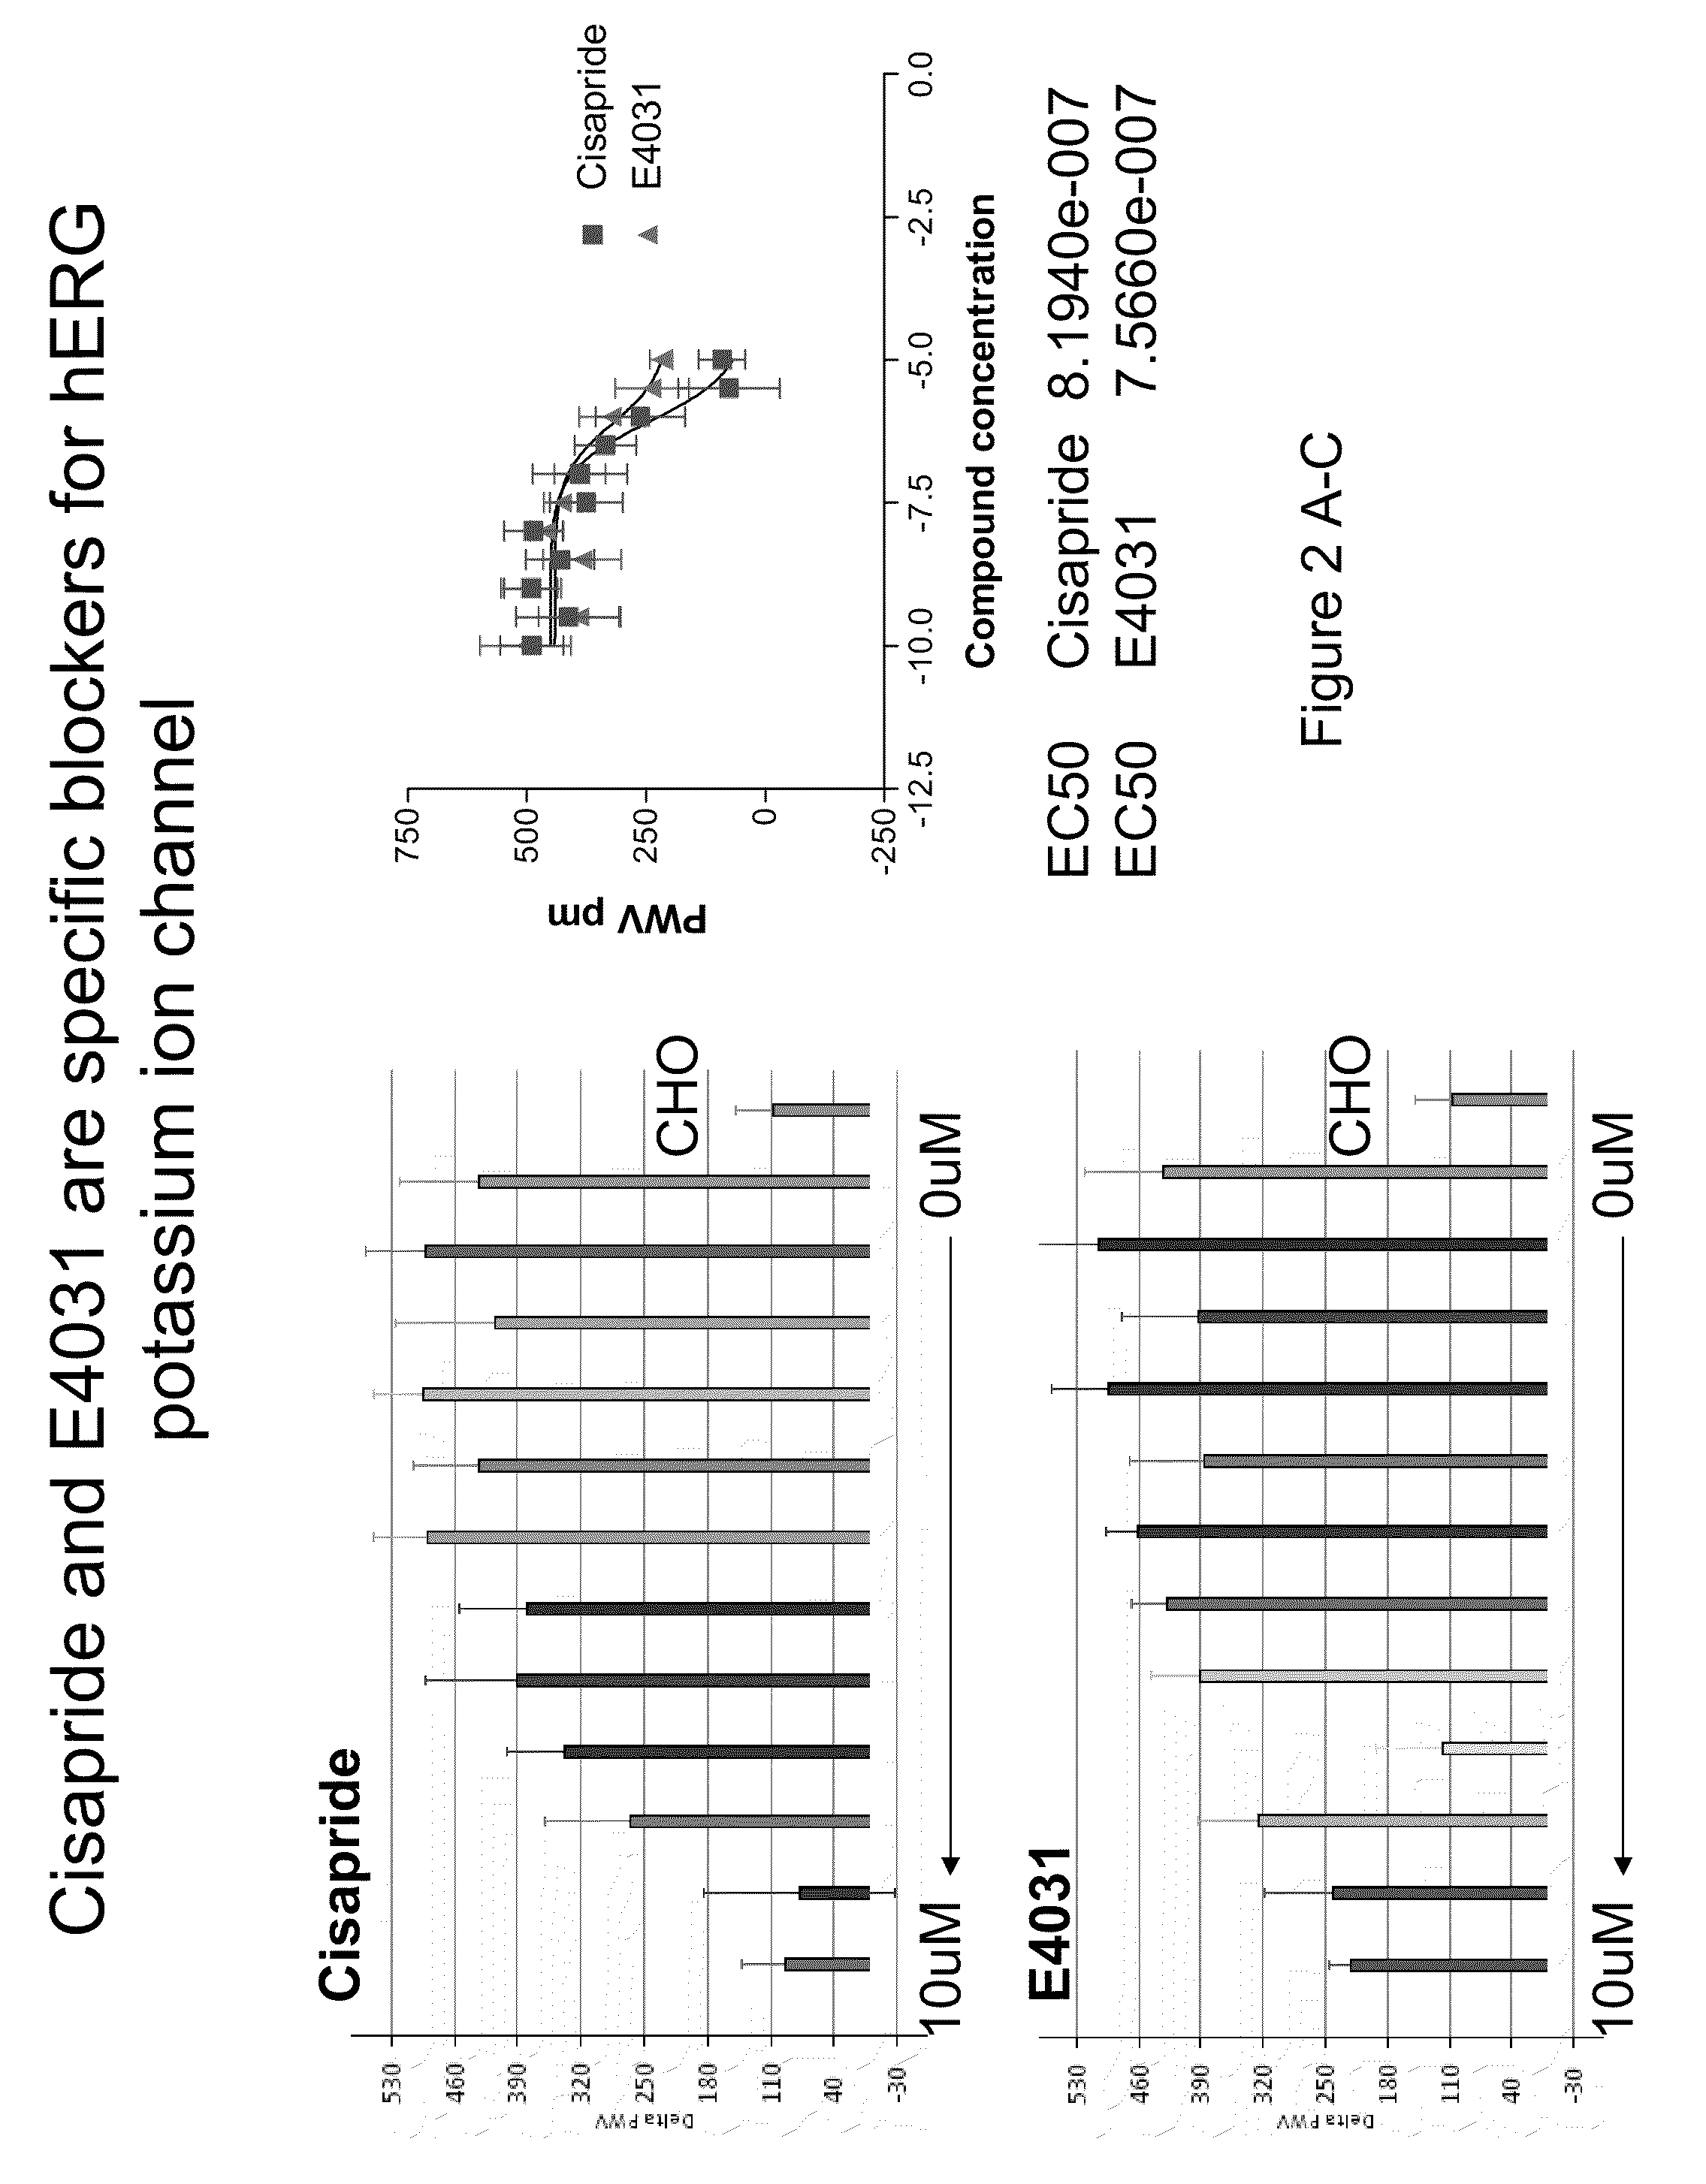 Methods for Identifying Modulators of Ion Channels